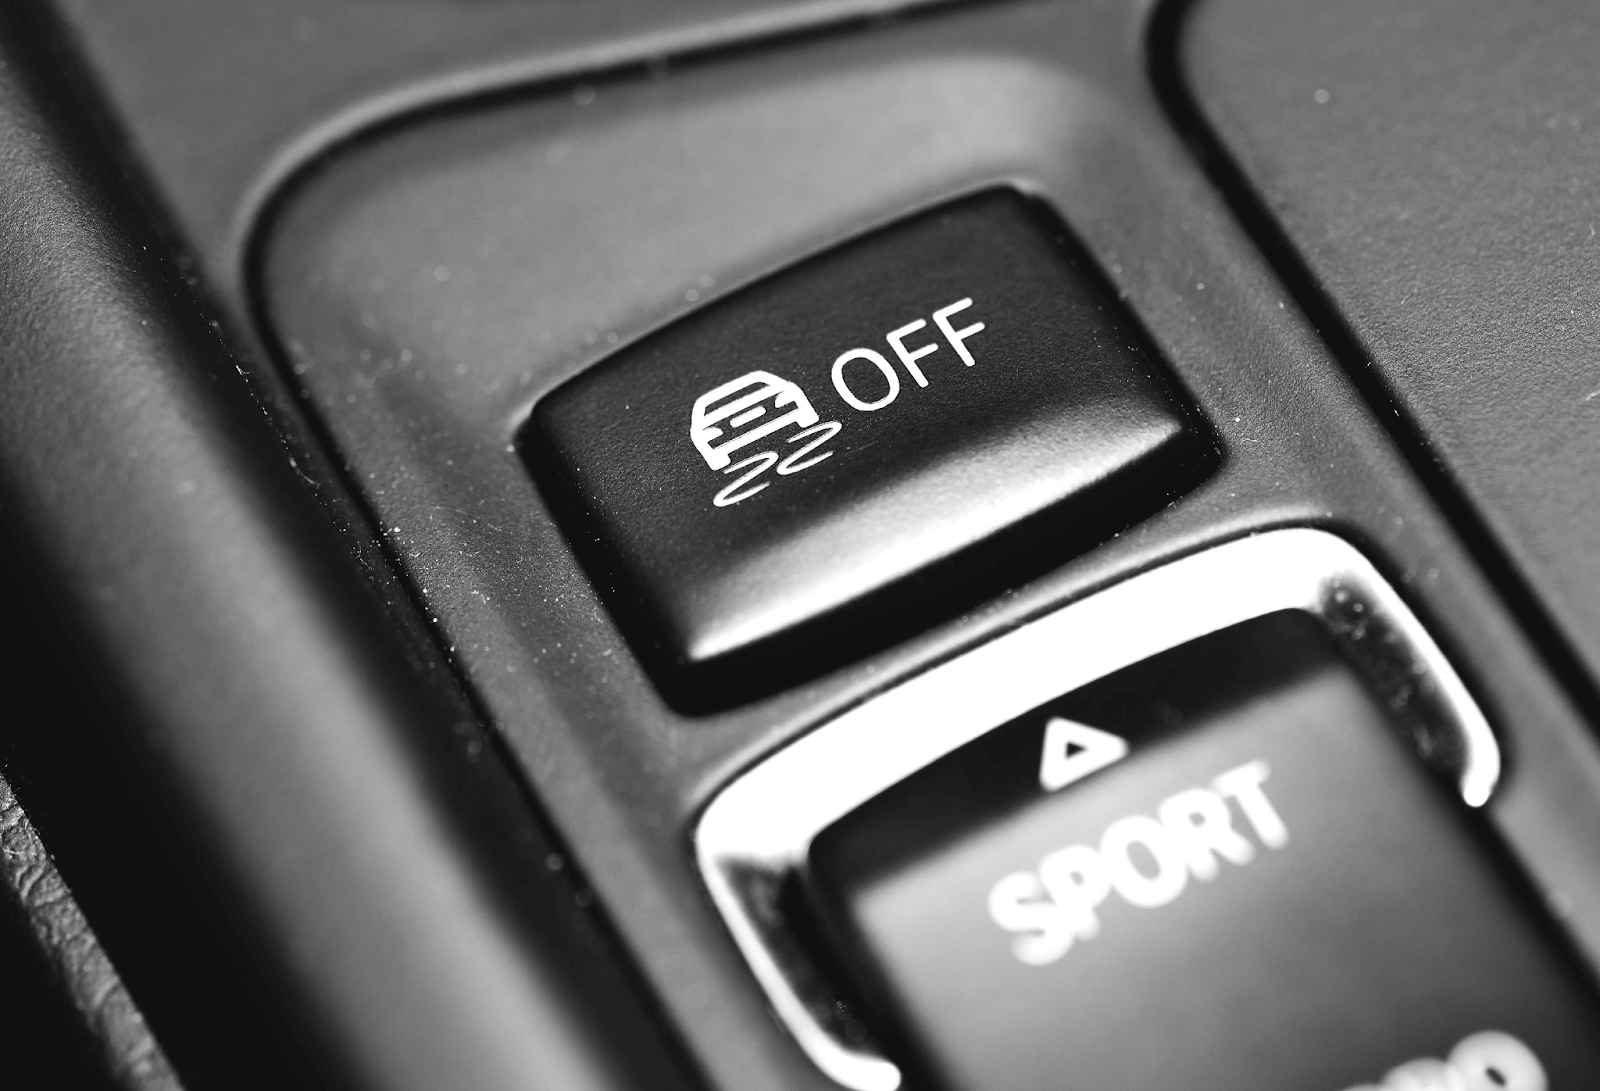 Most cars have a button or switch that allows you to disable TC